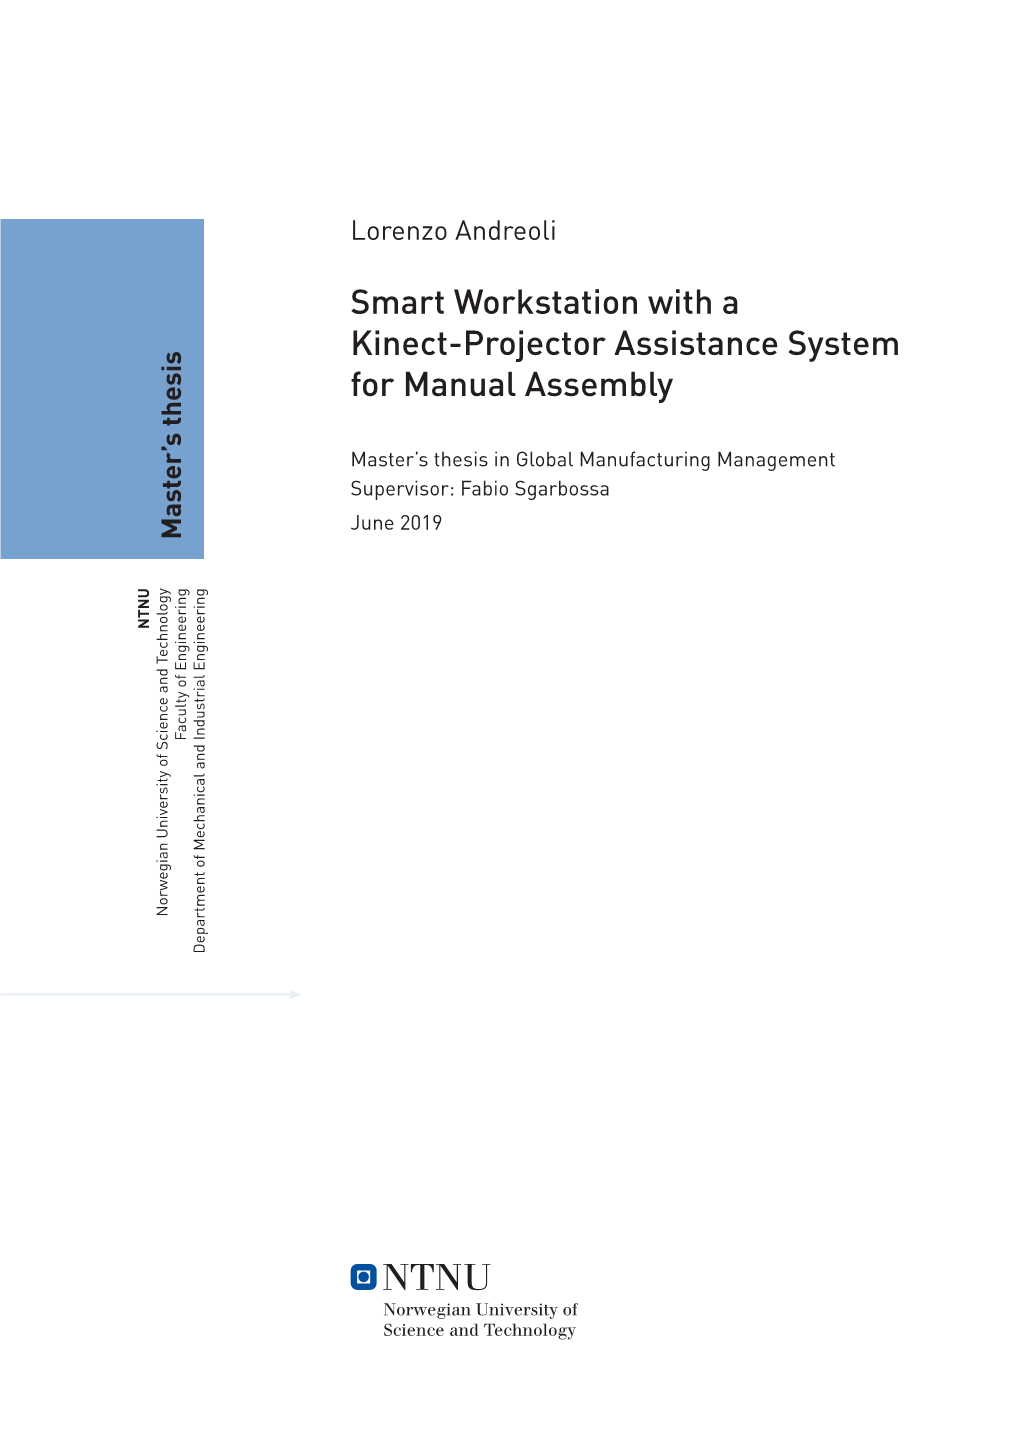 Smart Workstation with a Kinect-Projector Assistance System for Manual Assembly